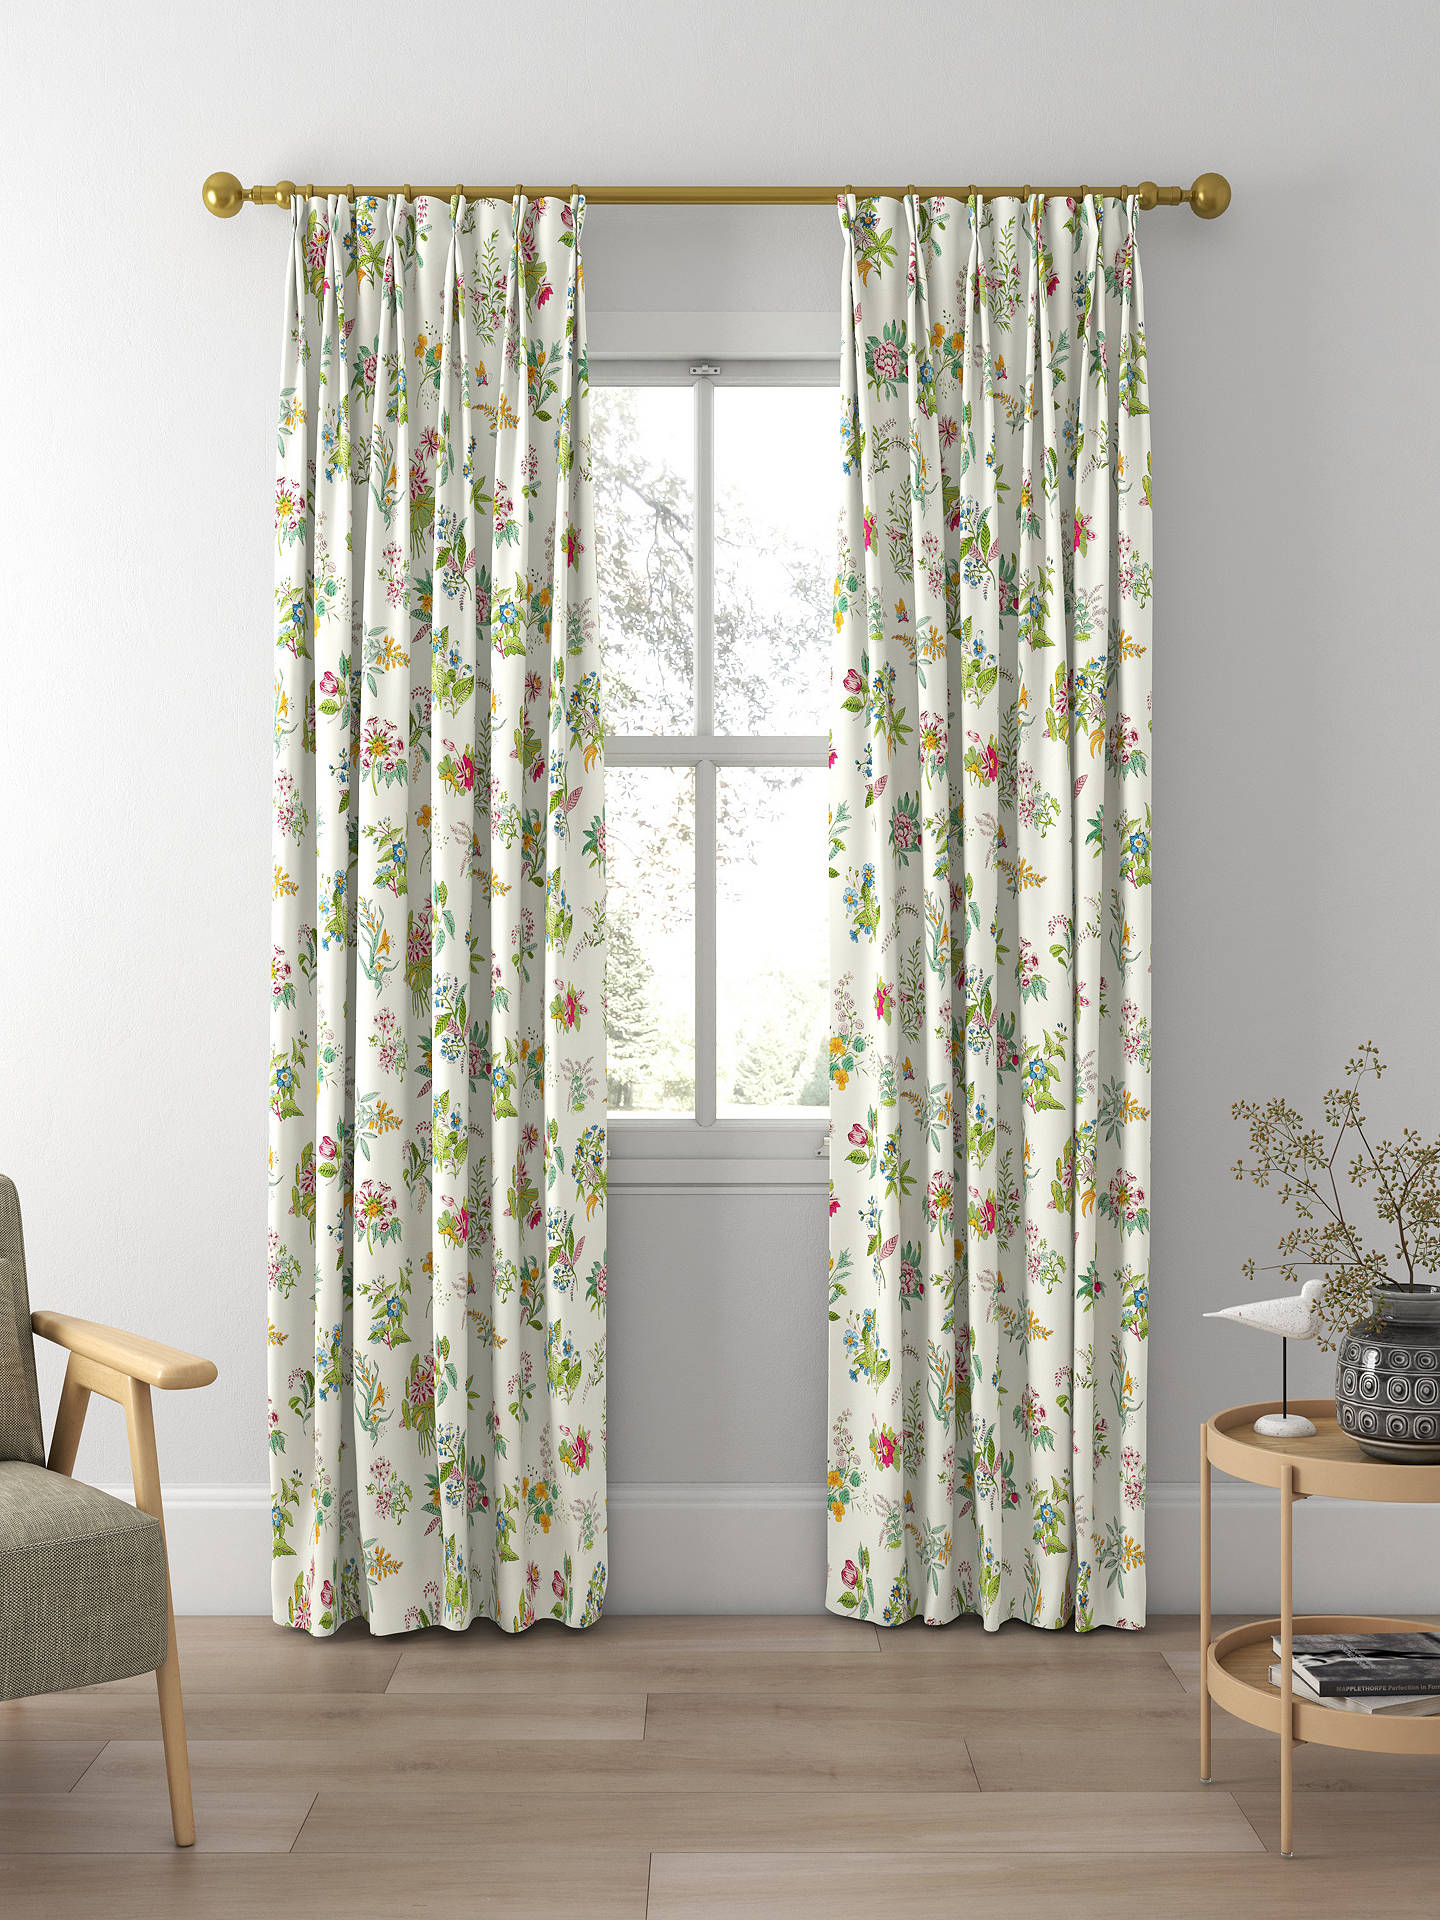 Harlequin x Sophie Robinson Woodland Floral Made to Measure Curtains, Peridot/Ruby/Pearl